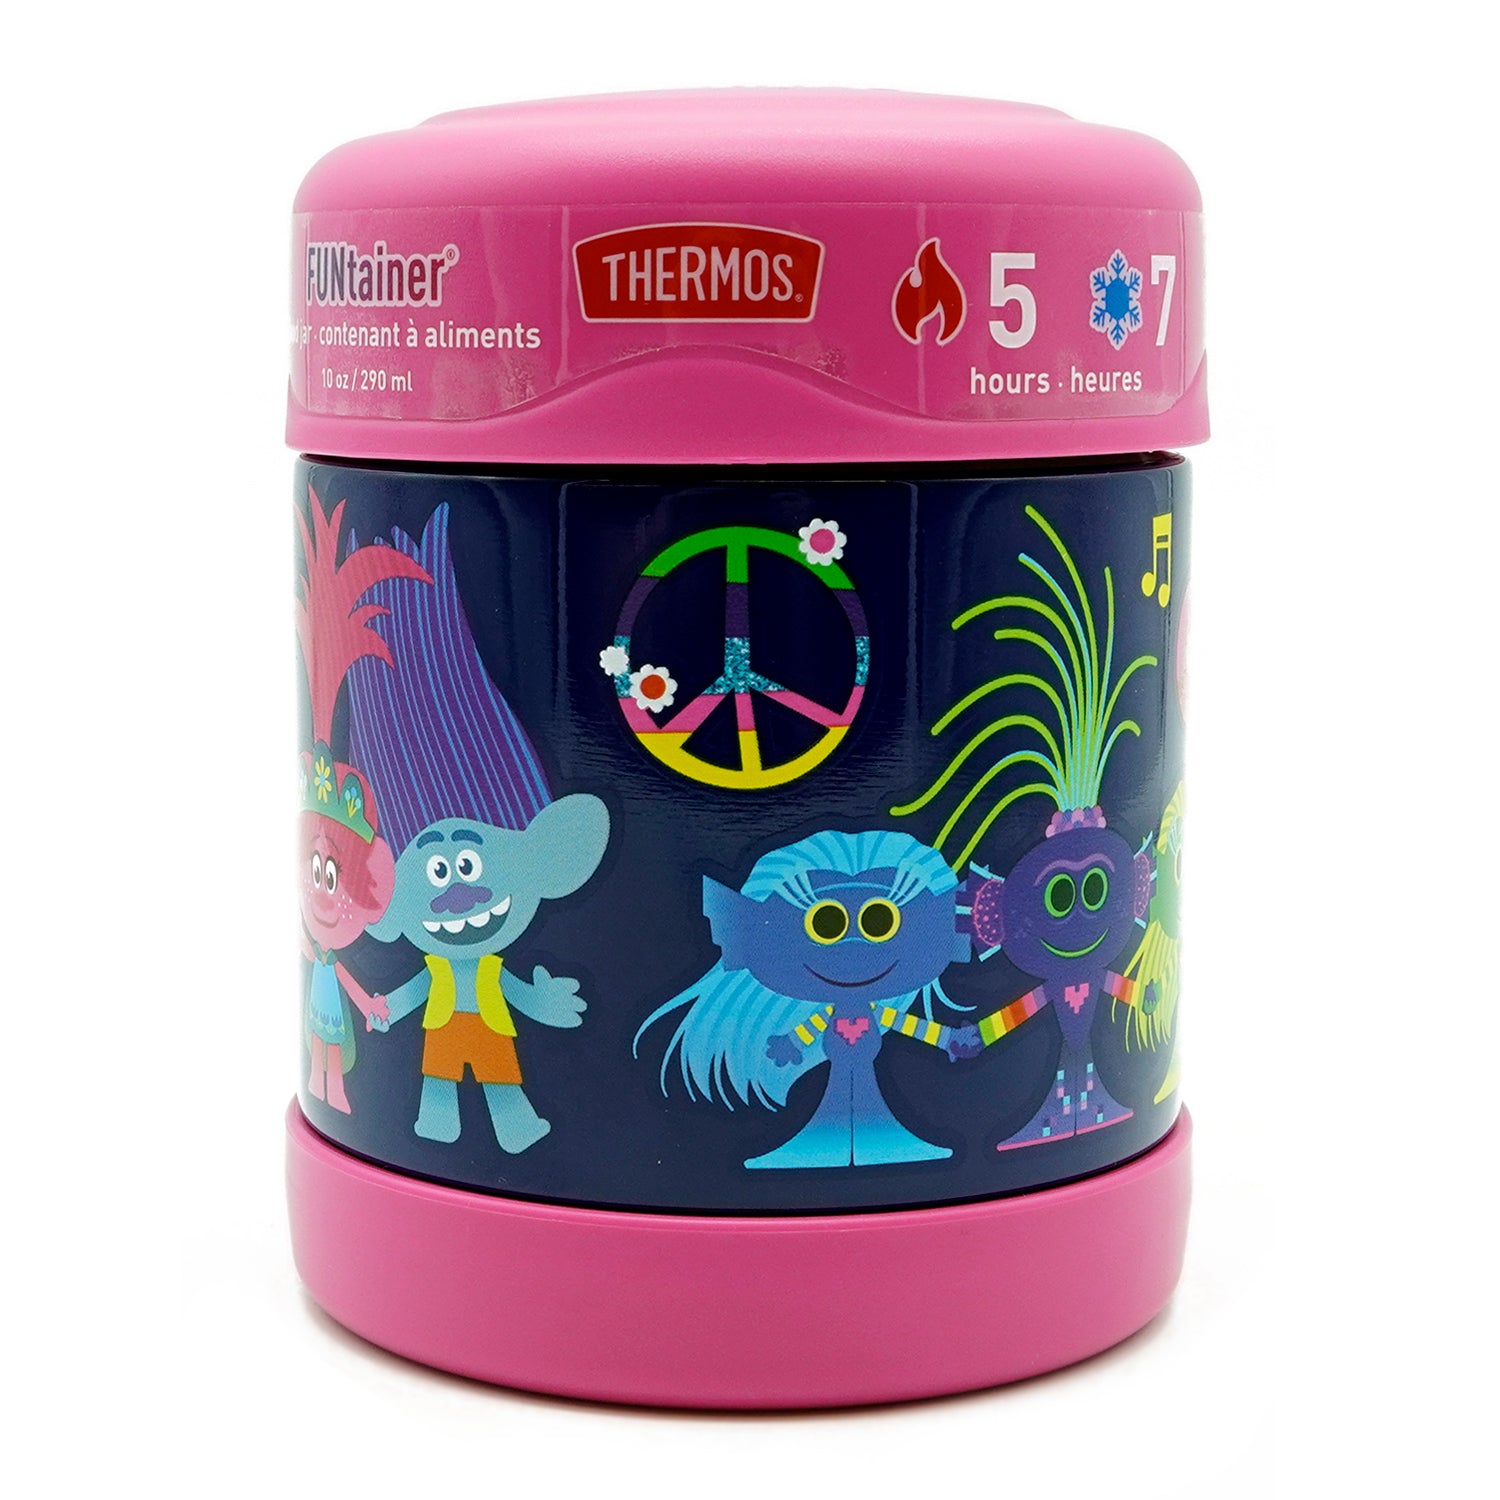 Thermos 10 oz. Kid's Trolls Funtainer Vacuum Insulated Stainless Steel Food Jar Thermos